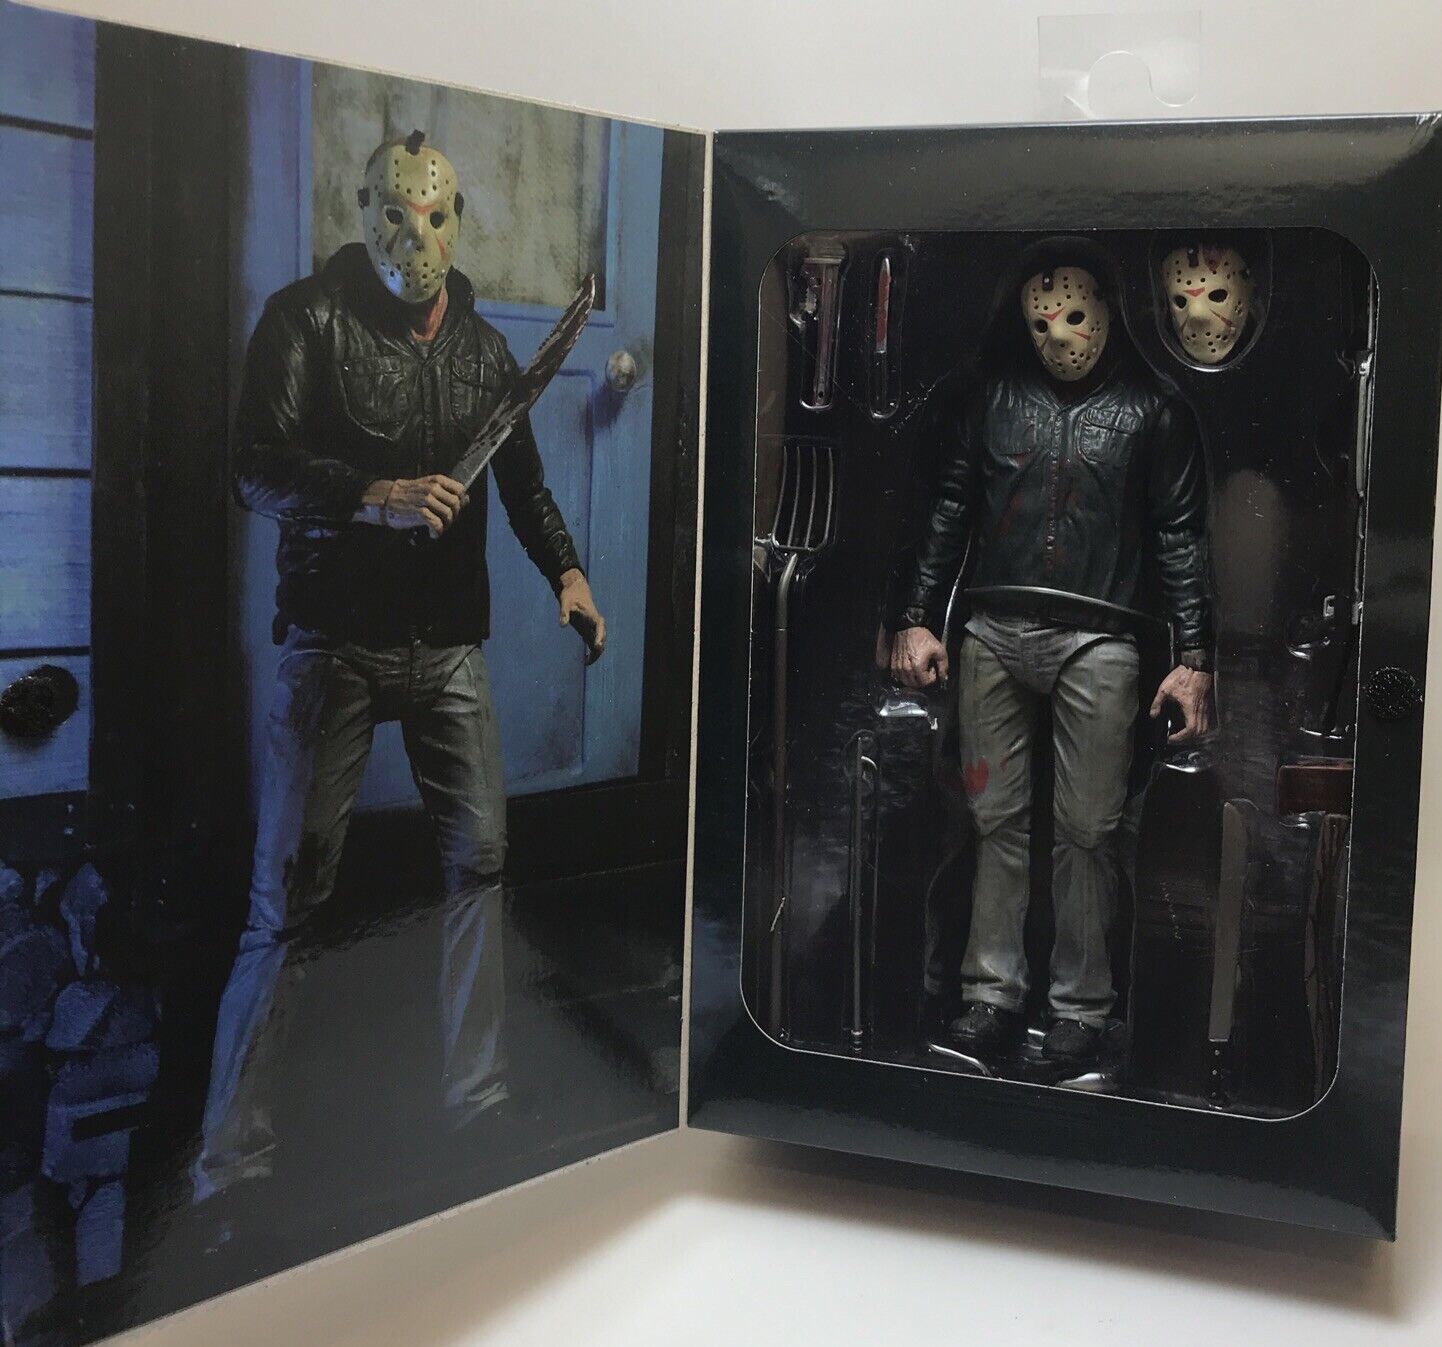 NECA 7" Action Figure 1:12 Friday the 13th Part III 3D Jason Voorhees Ultimate